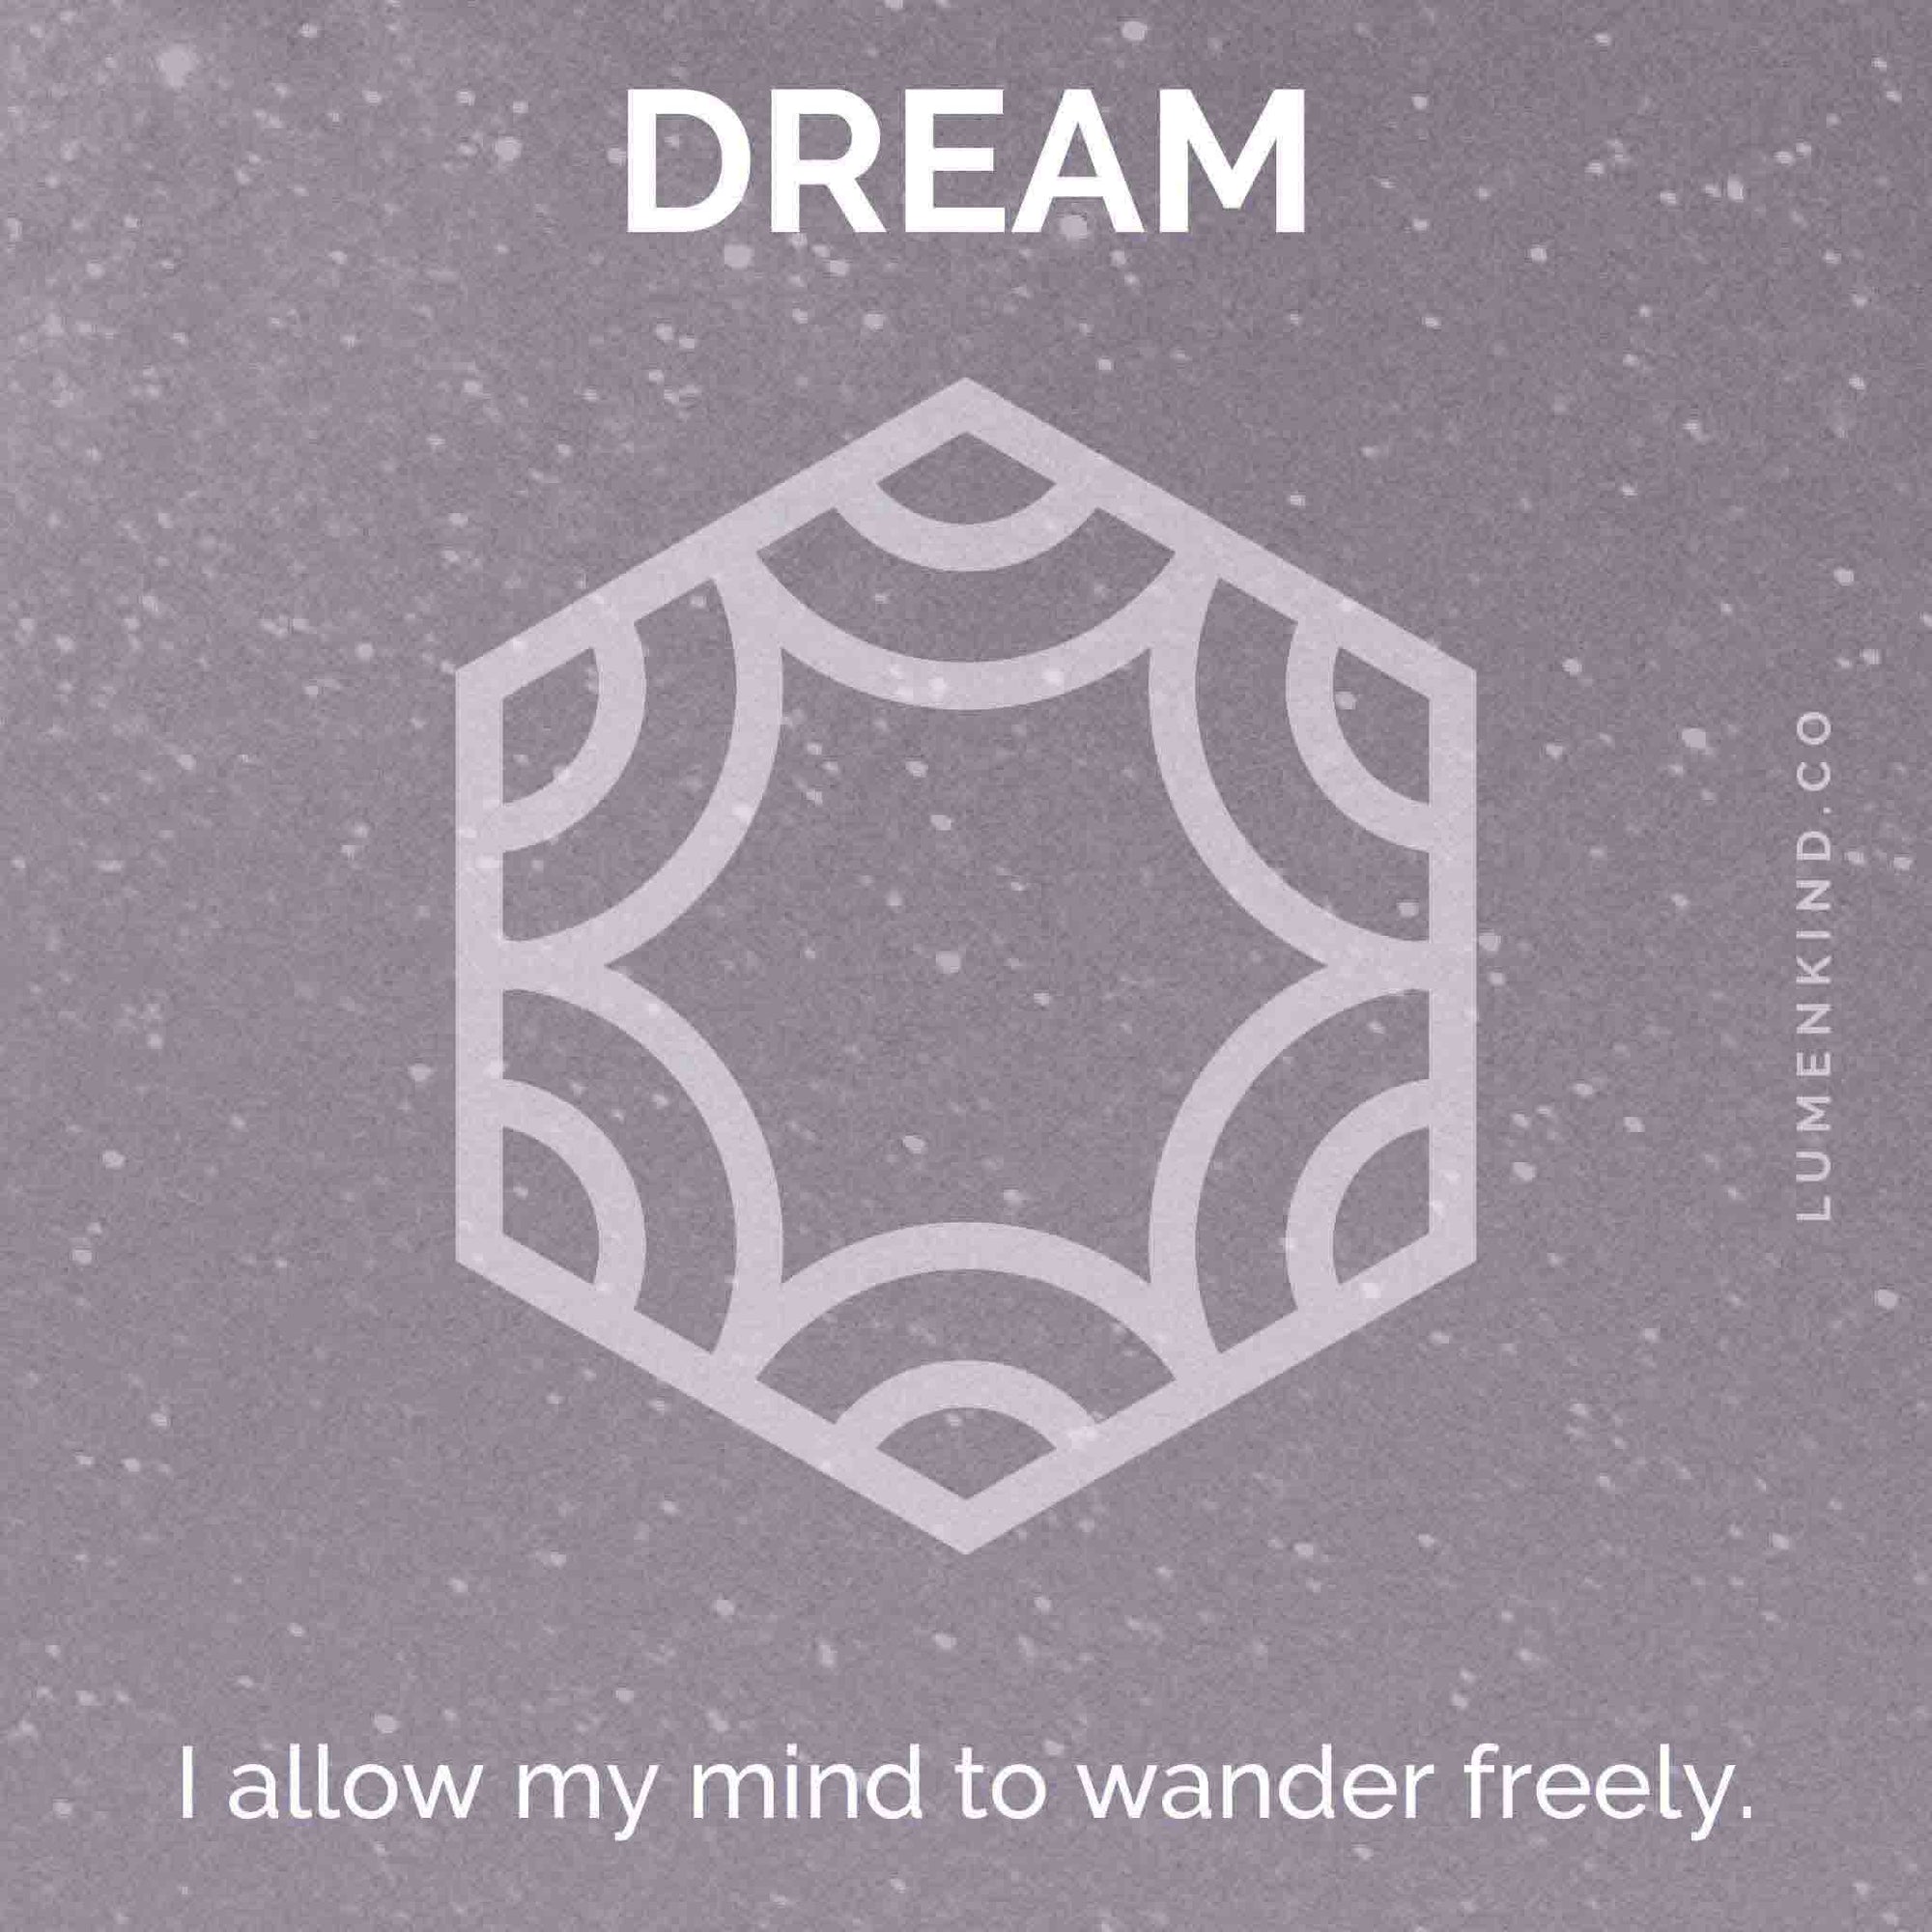 The suggested intention is DREAM. I allow my mind to wander freely.